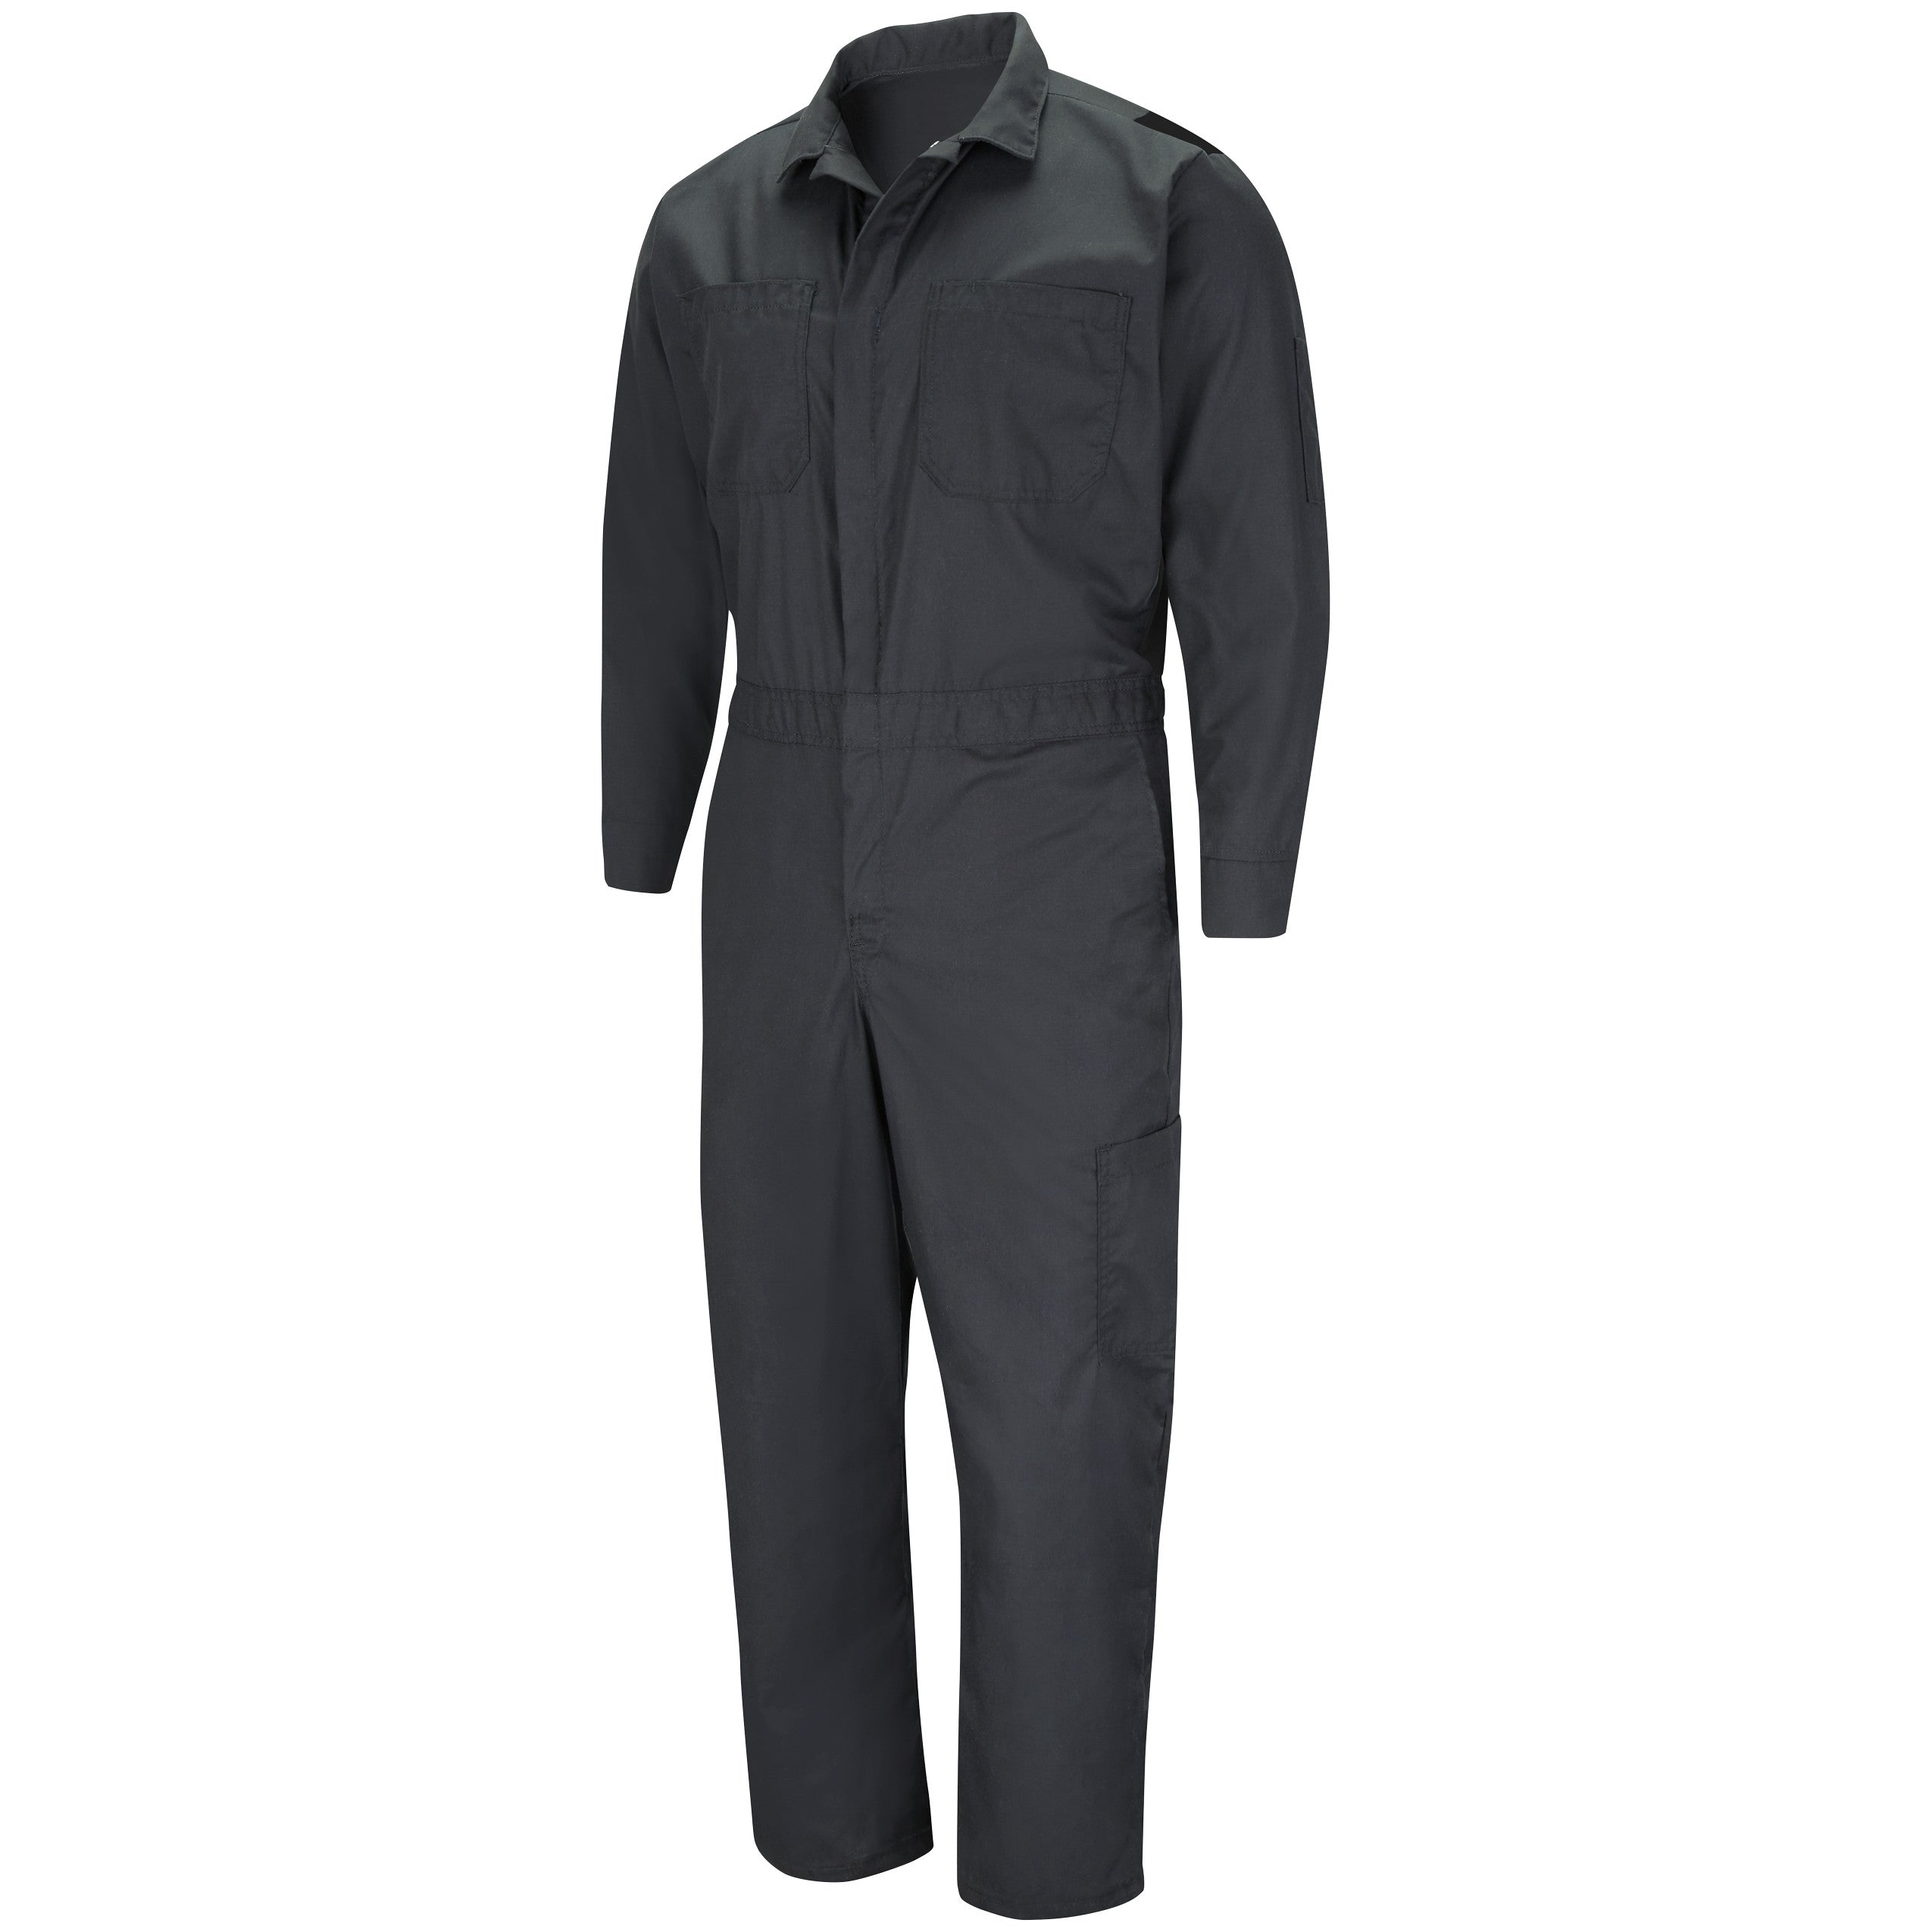 Performance Plus Lightweight Coverall with OilBlok Technology CY34 - Charcoal / Black Mesh-eSafety Supplies, Inc